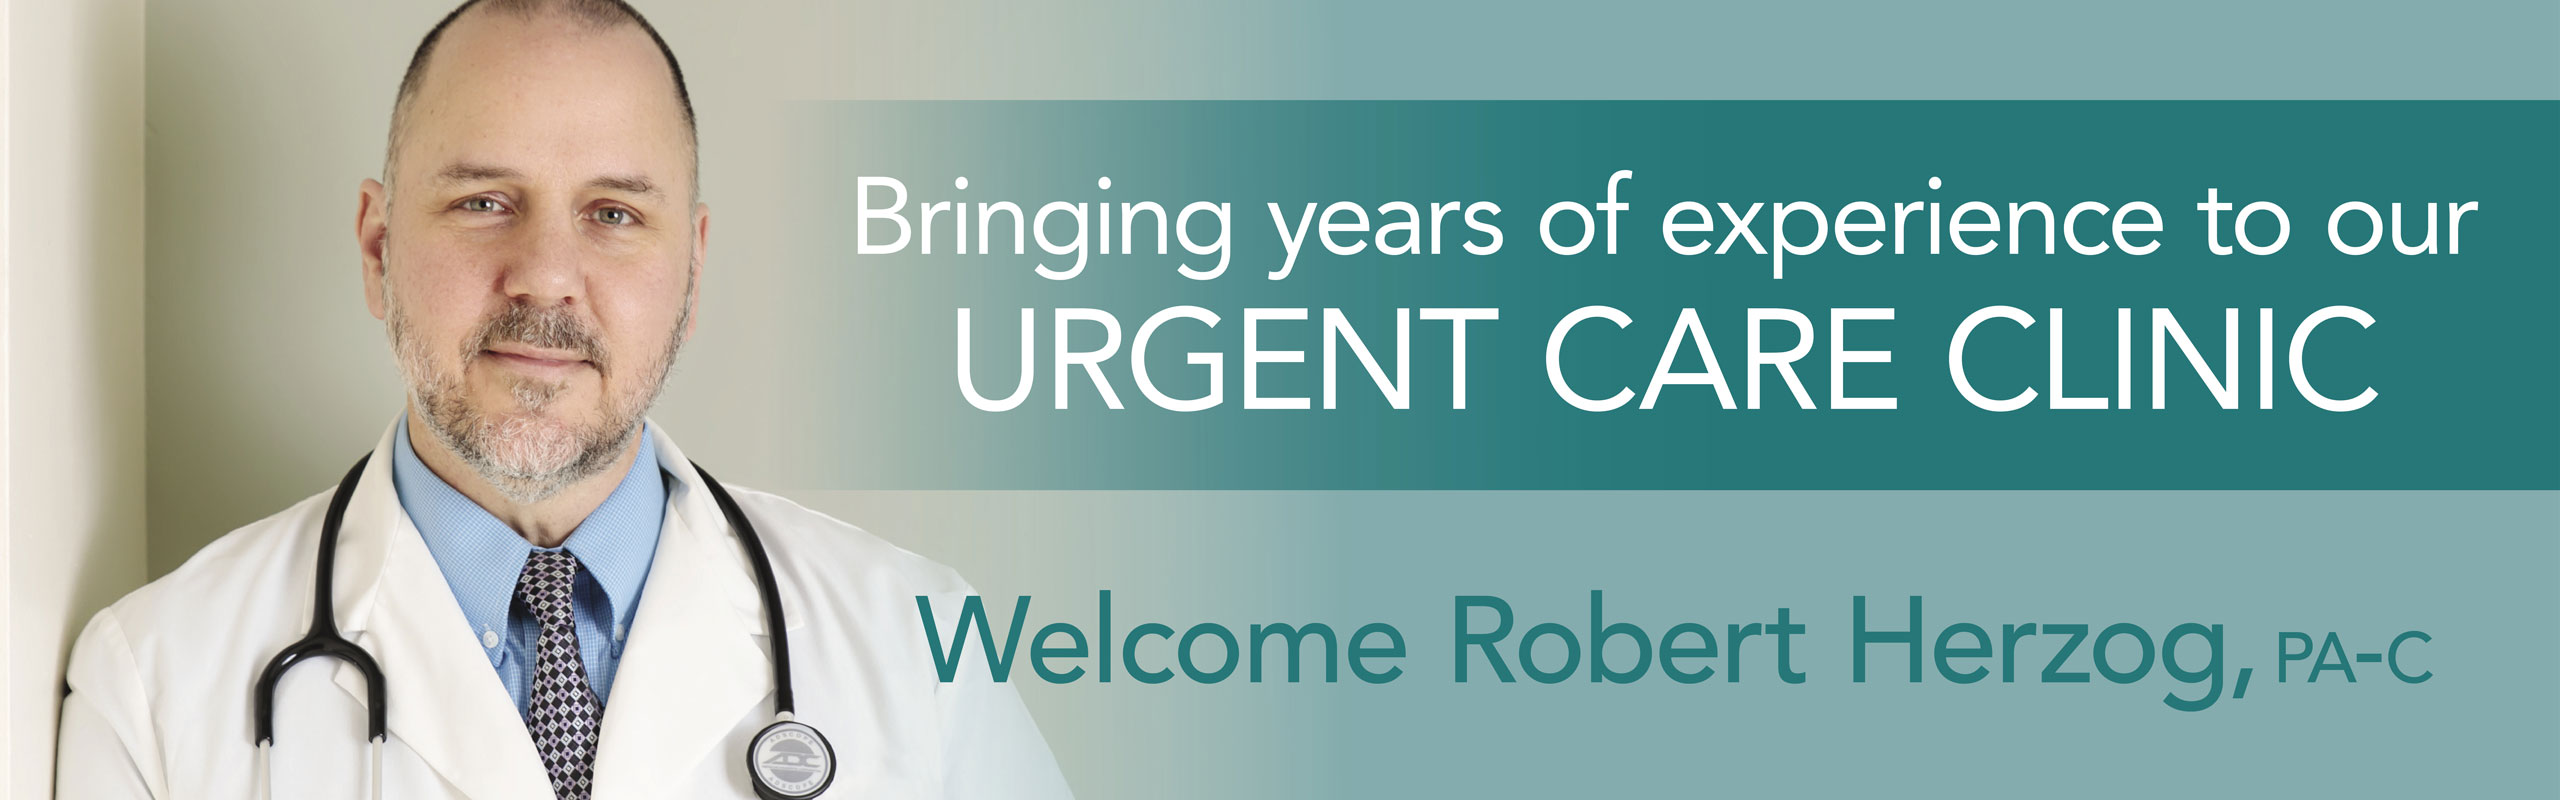 Bringing years of experience to our Urgent Care Clinic 
Welcome Robert Herzog, PA-C